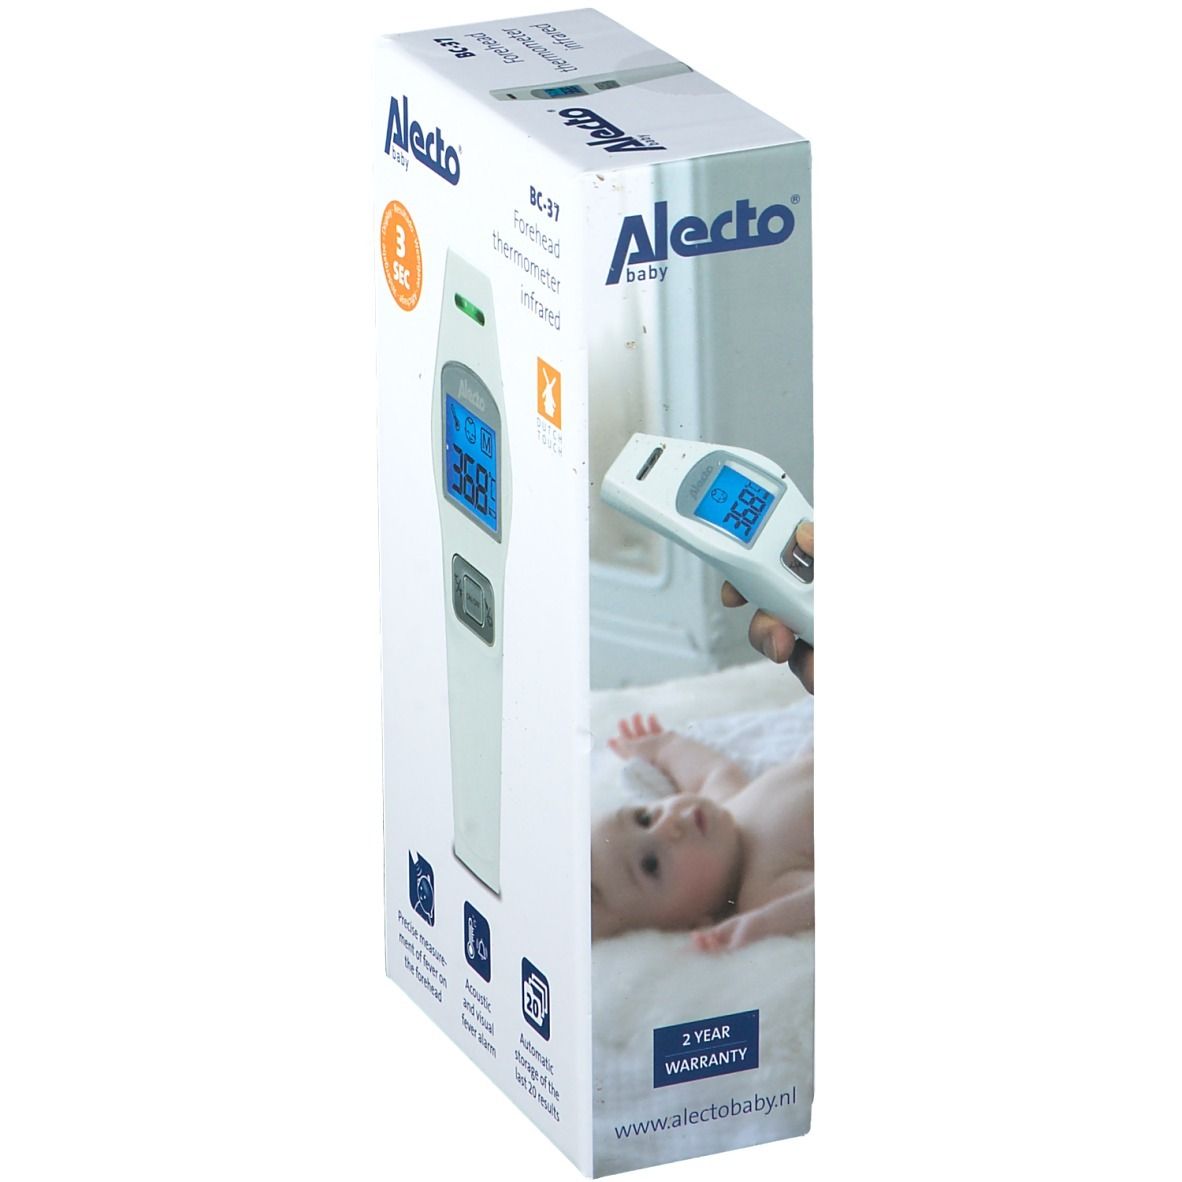 Alecto® baby Thermomètre Frontal Infrarouge